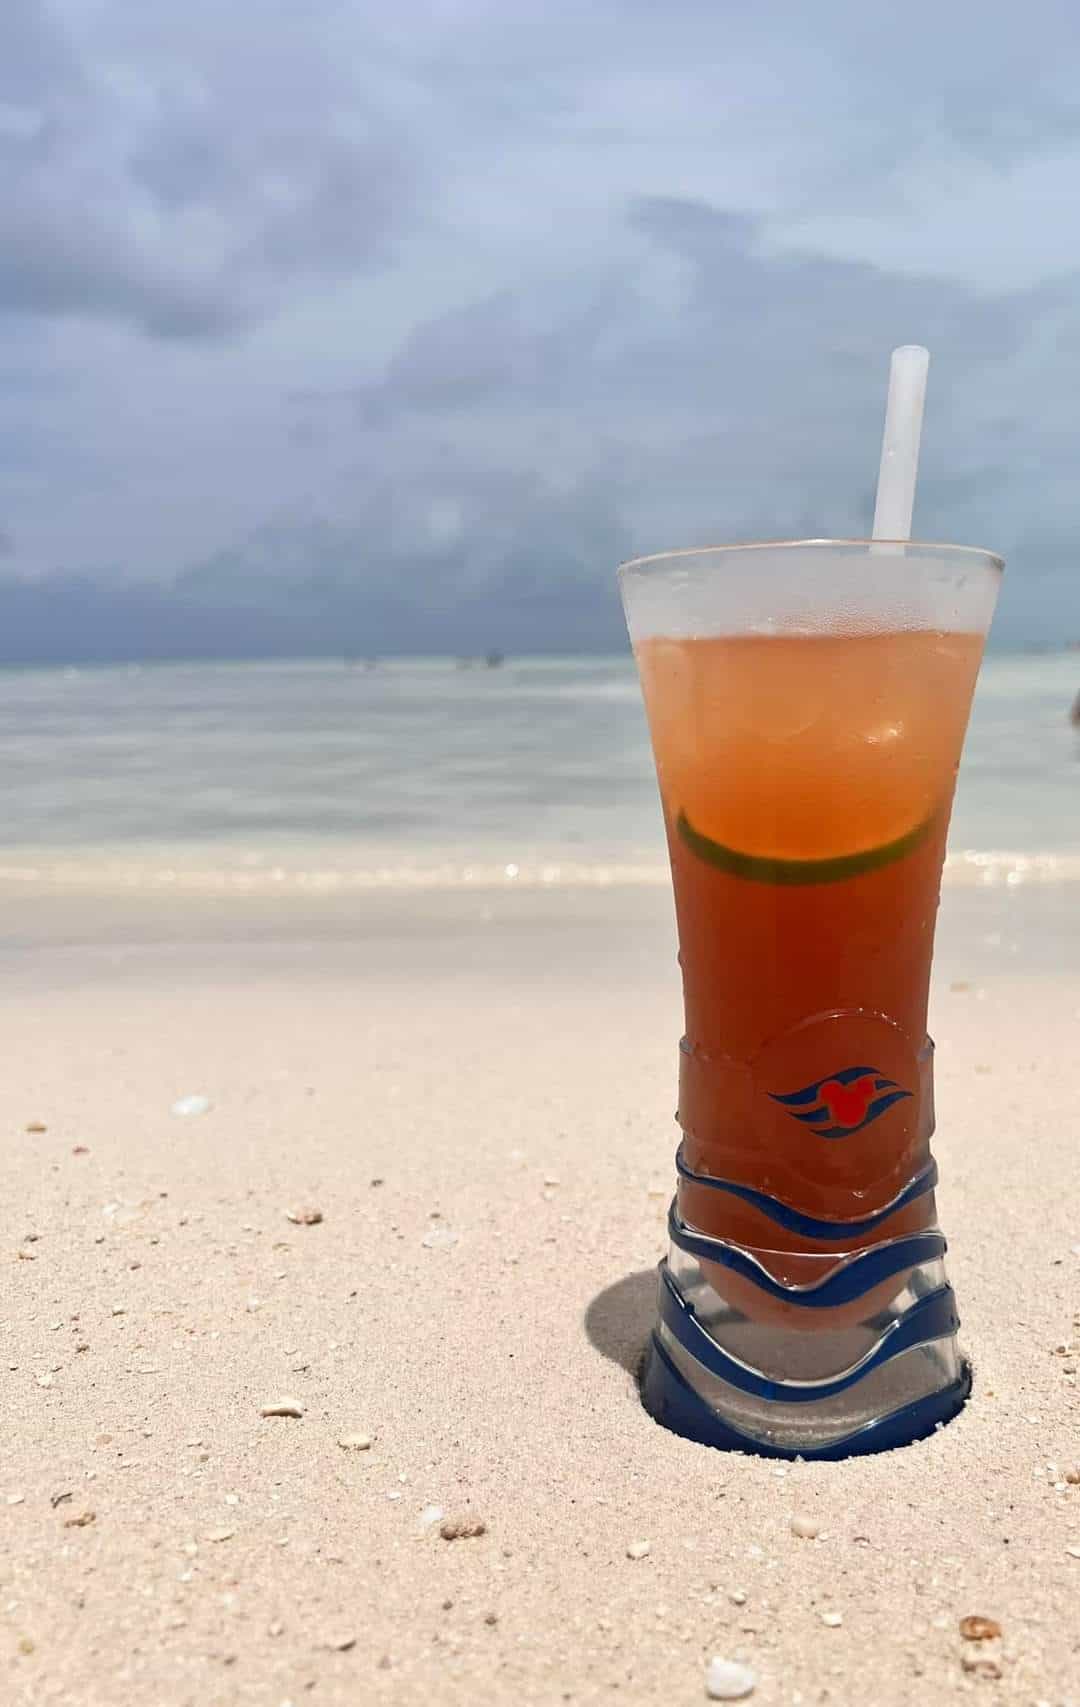 Relax at the beach with a refreshing beverage